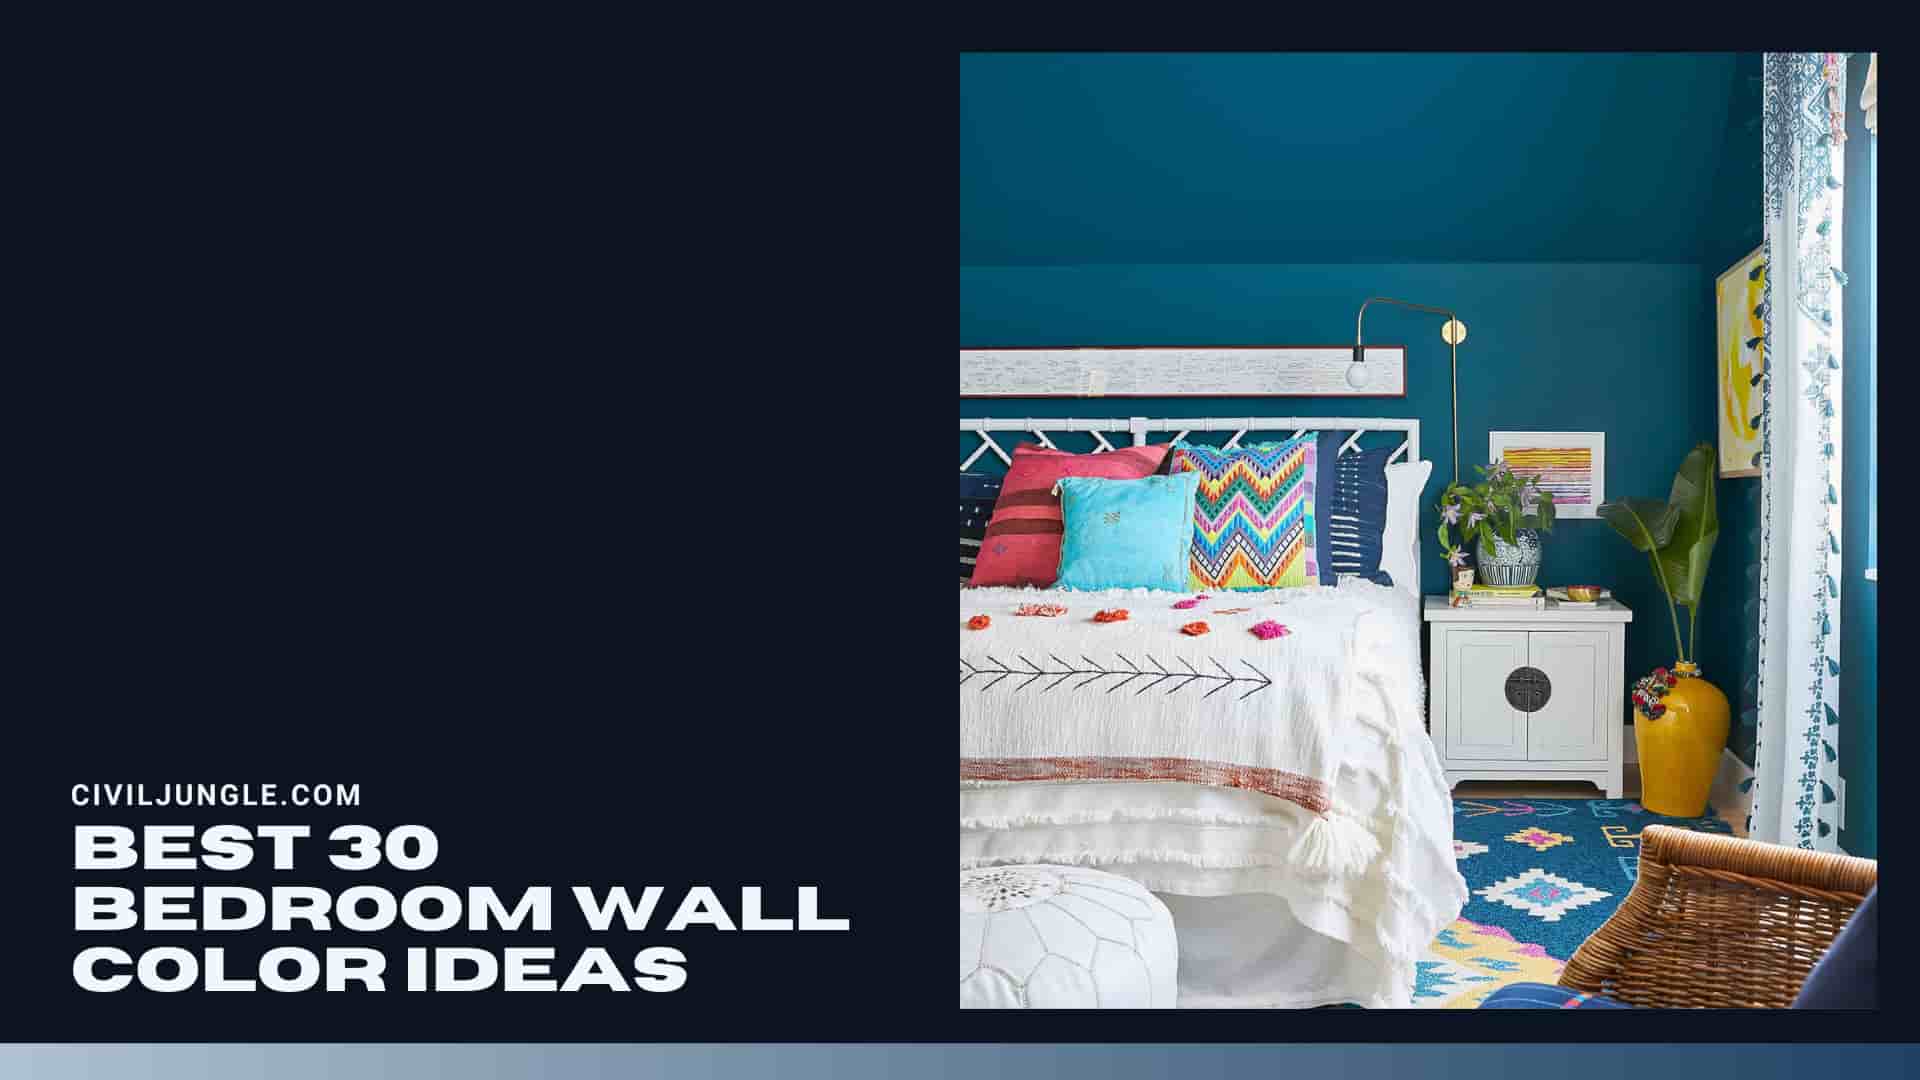 Best 30 Bedroom Wall Color Ideas